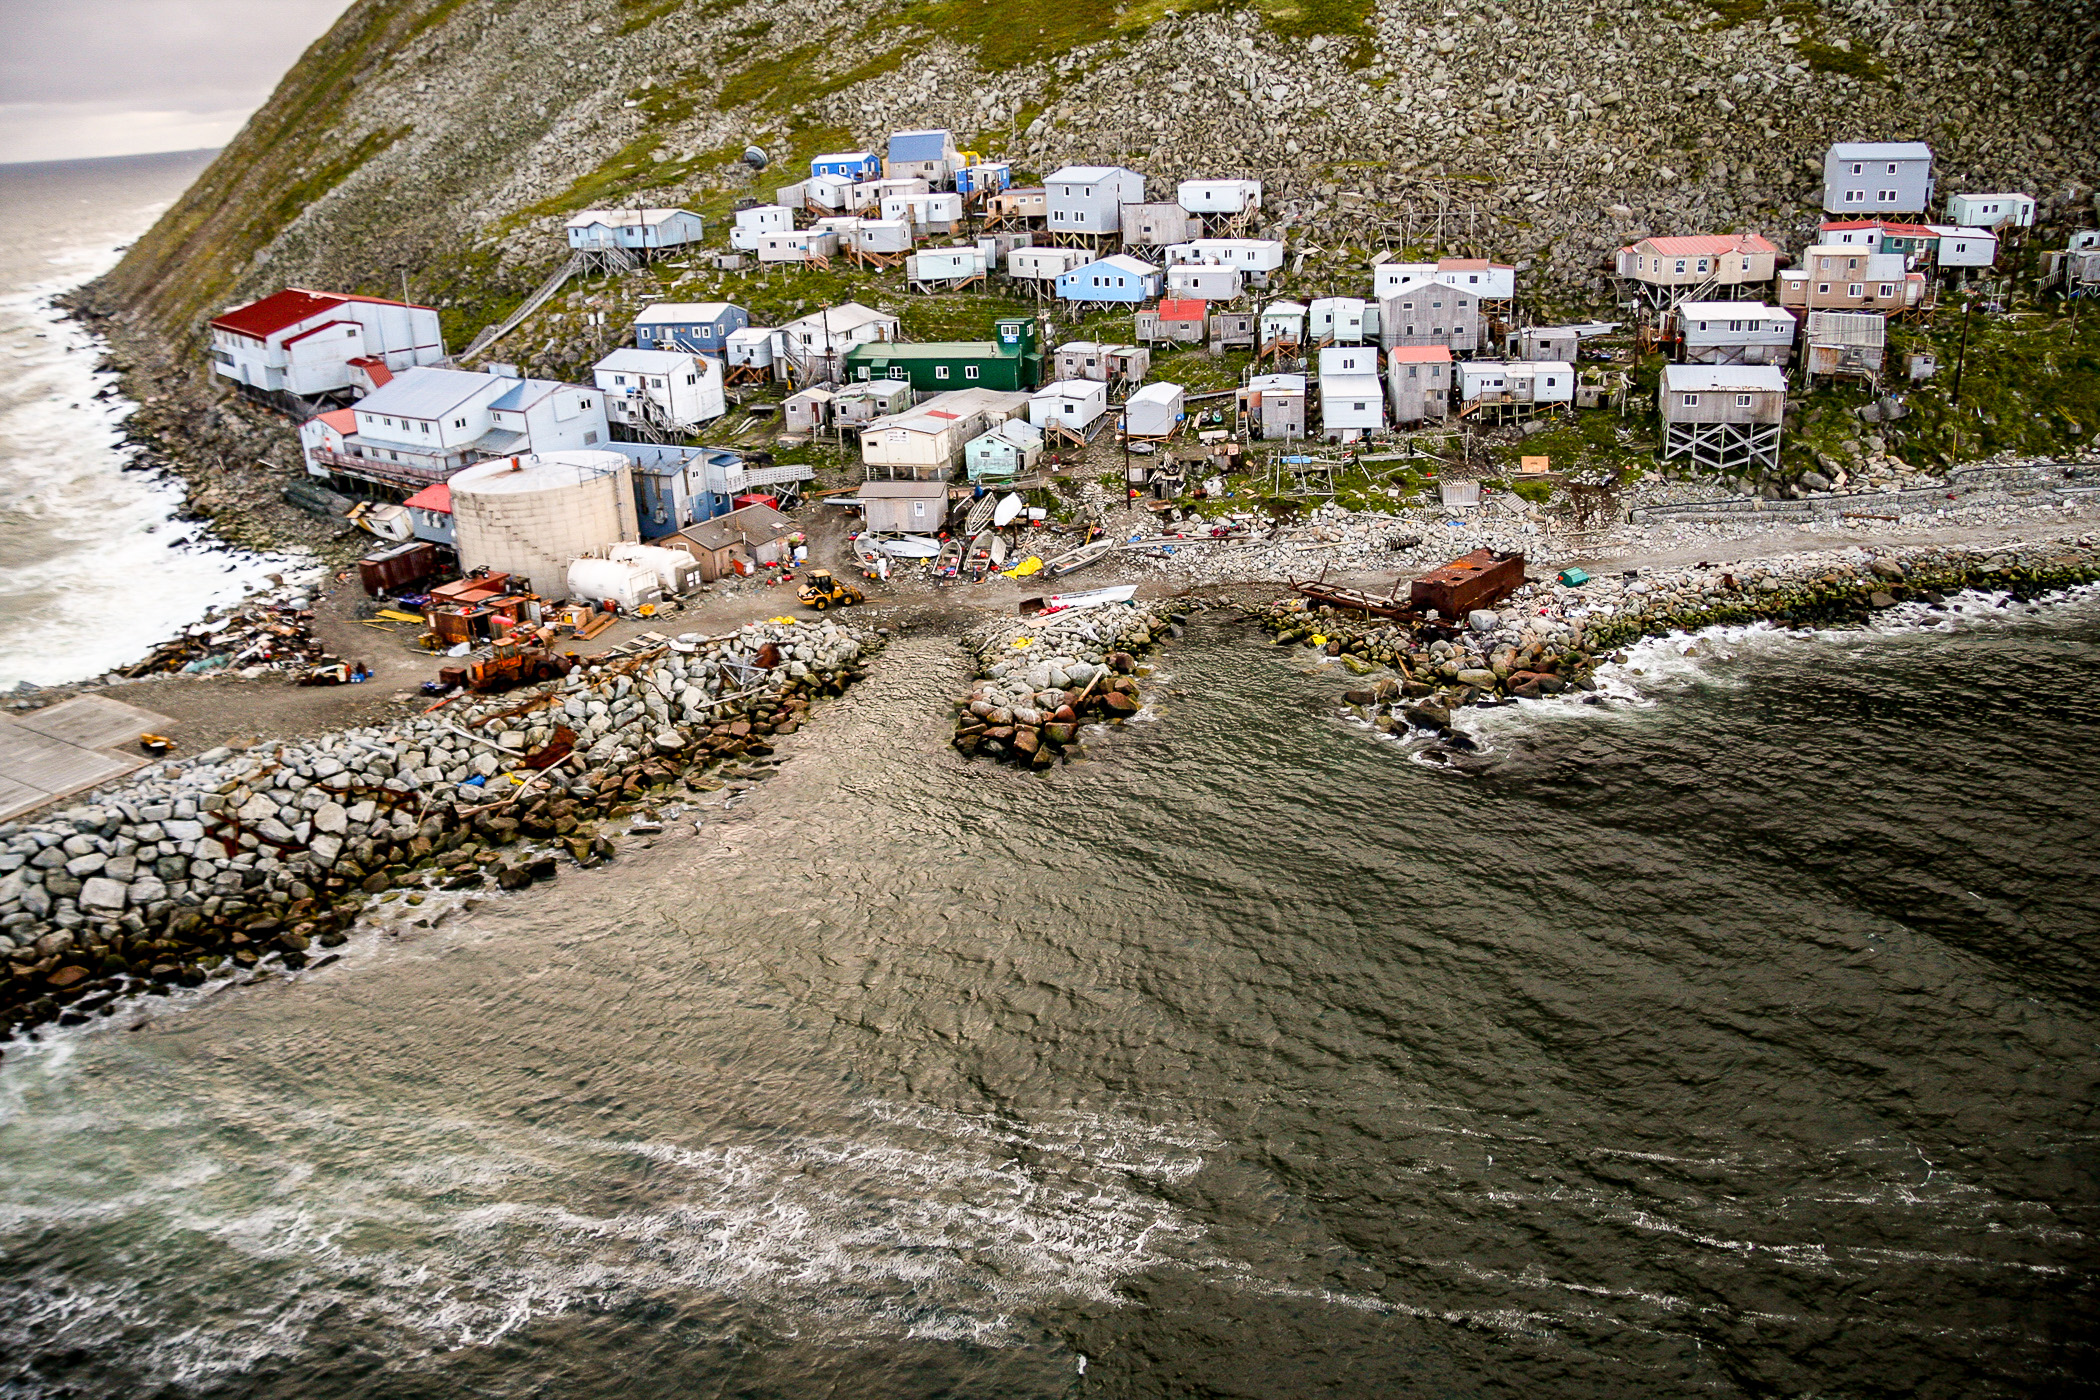 An aerial view of a small, coastal village